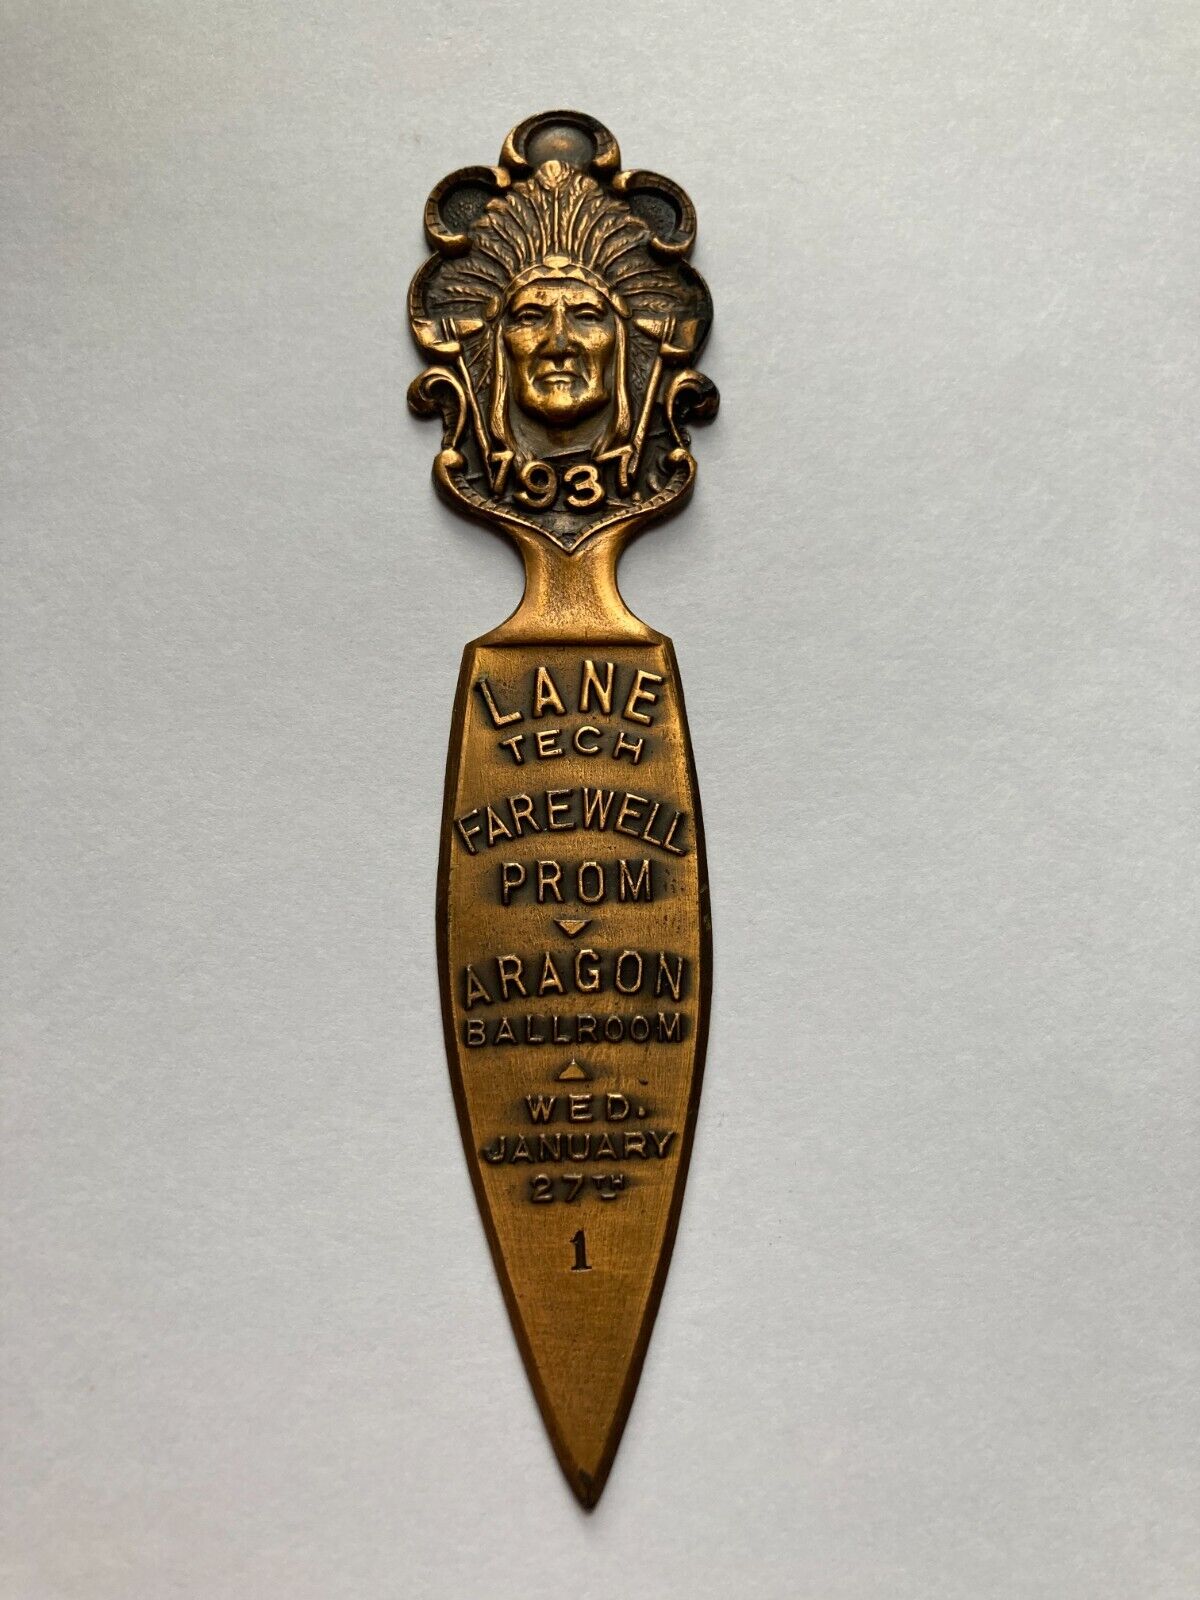 VINTAGE 1937 CHILDS CHICAGO LANE TECH HIGH SCHOOL INDIAN HEAD PROM LETTER OPENER